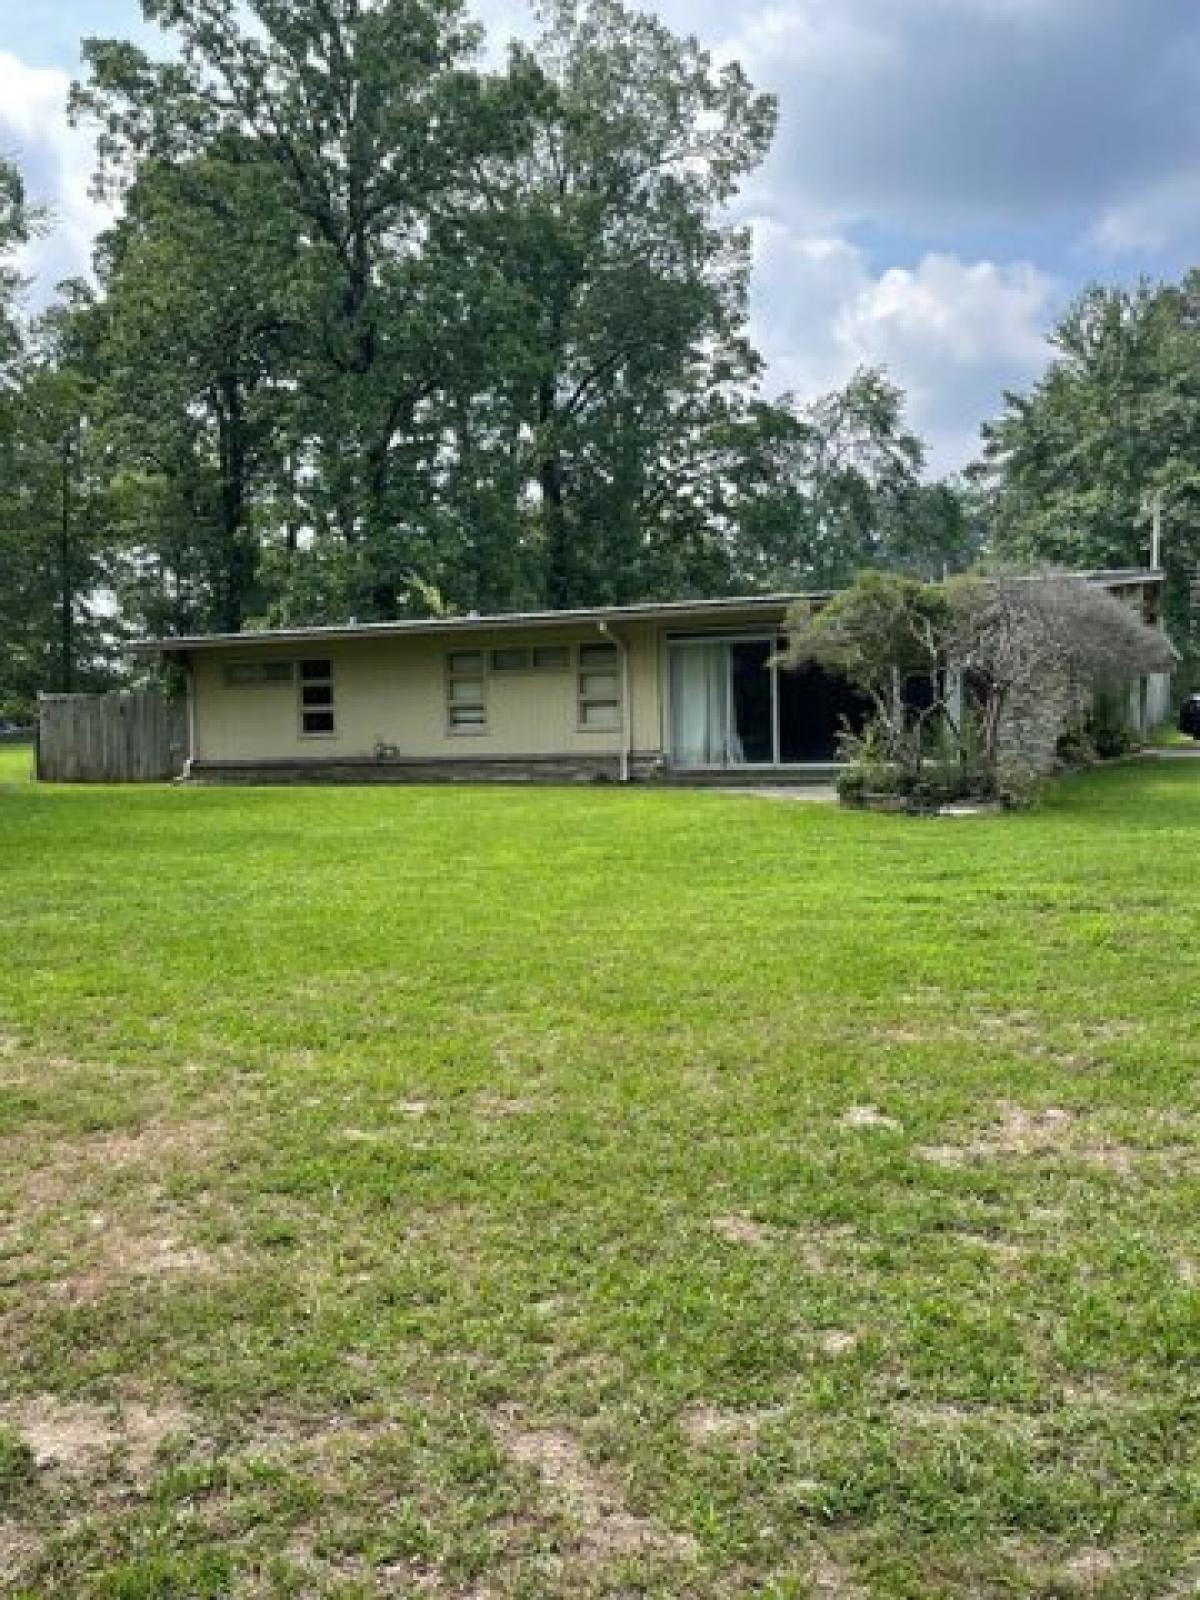 Picture of Home For Sale in Fordyce, Arkansas, United States